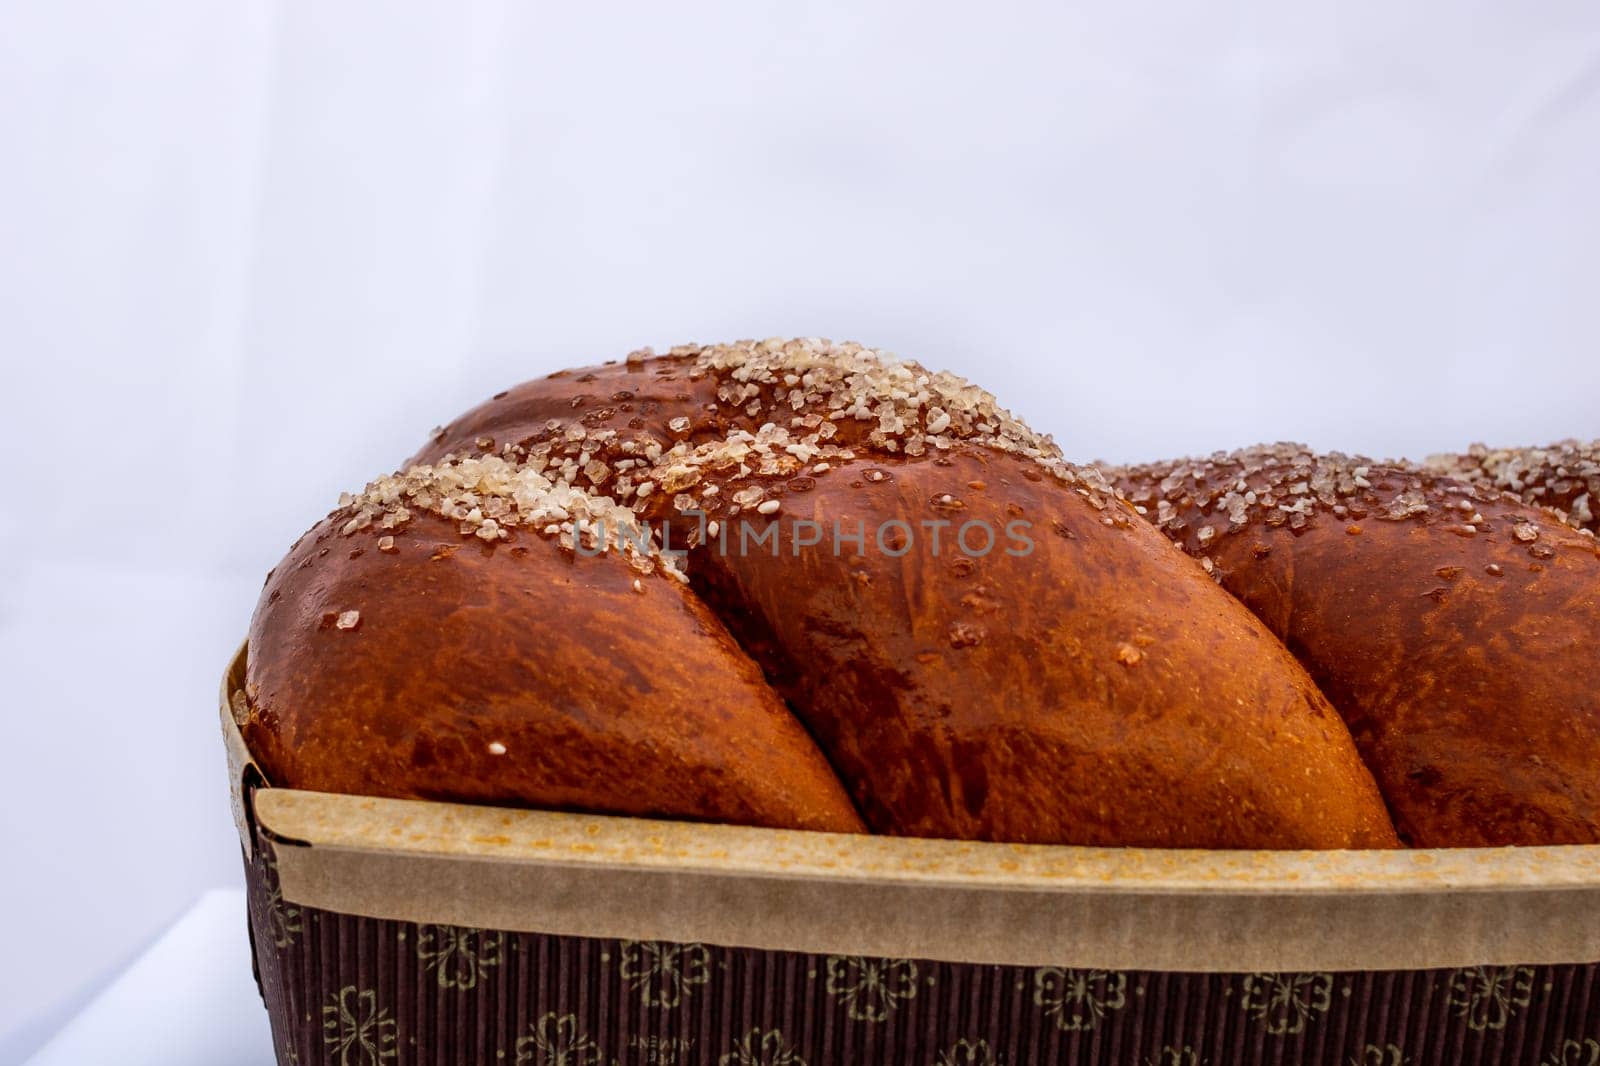 Cozonac or Kozunak, is a type of Stollen, or sweet leavened bread, traditional to Romania and Bulgaria